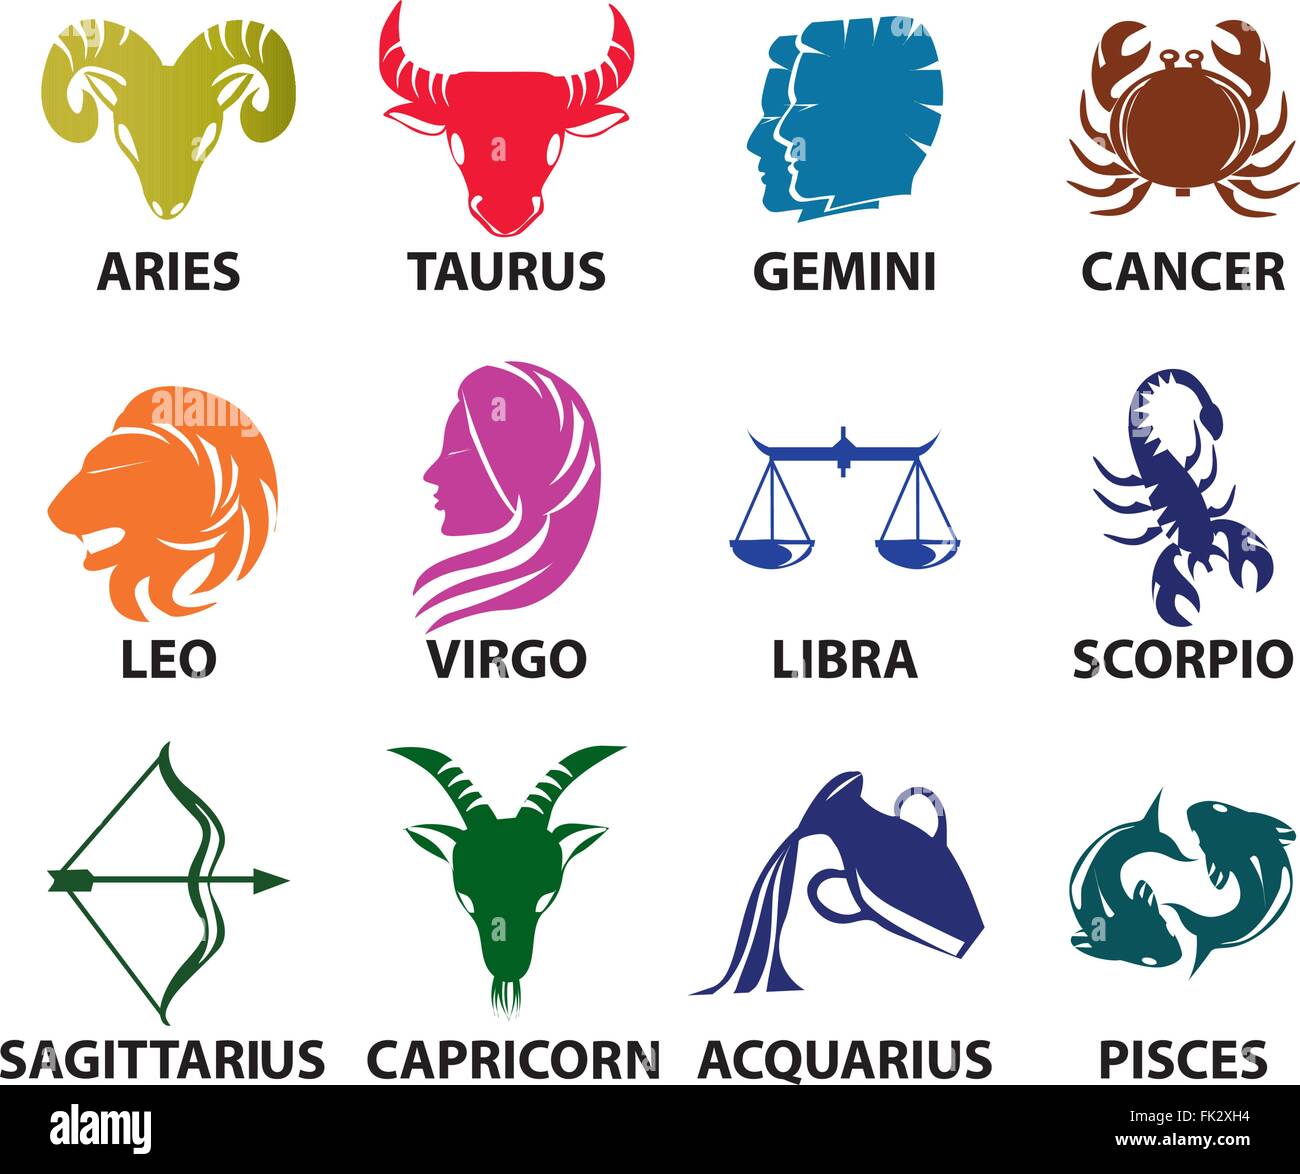 Zodiac Signs Symbols / There is something quite fun about learning all